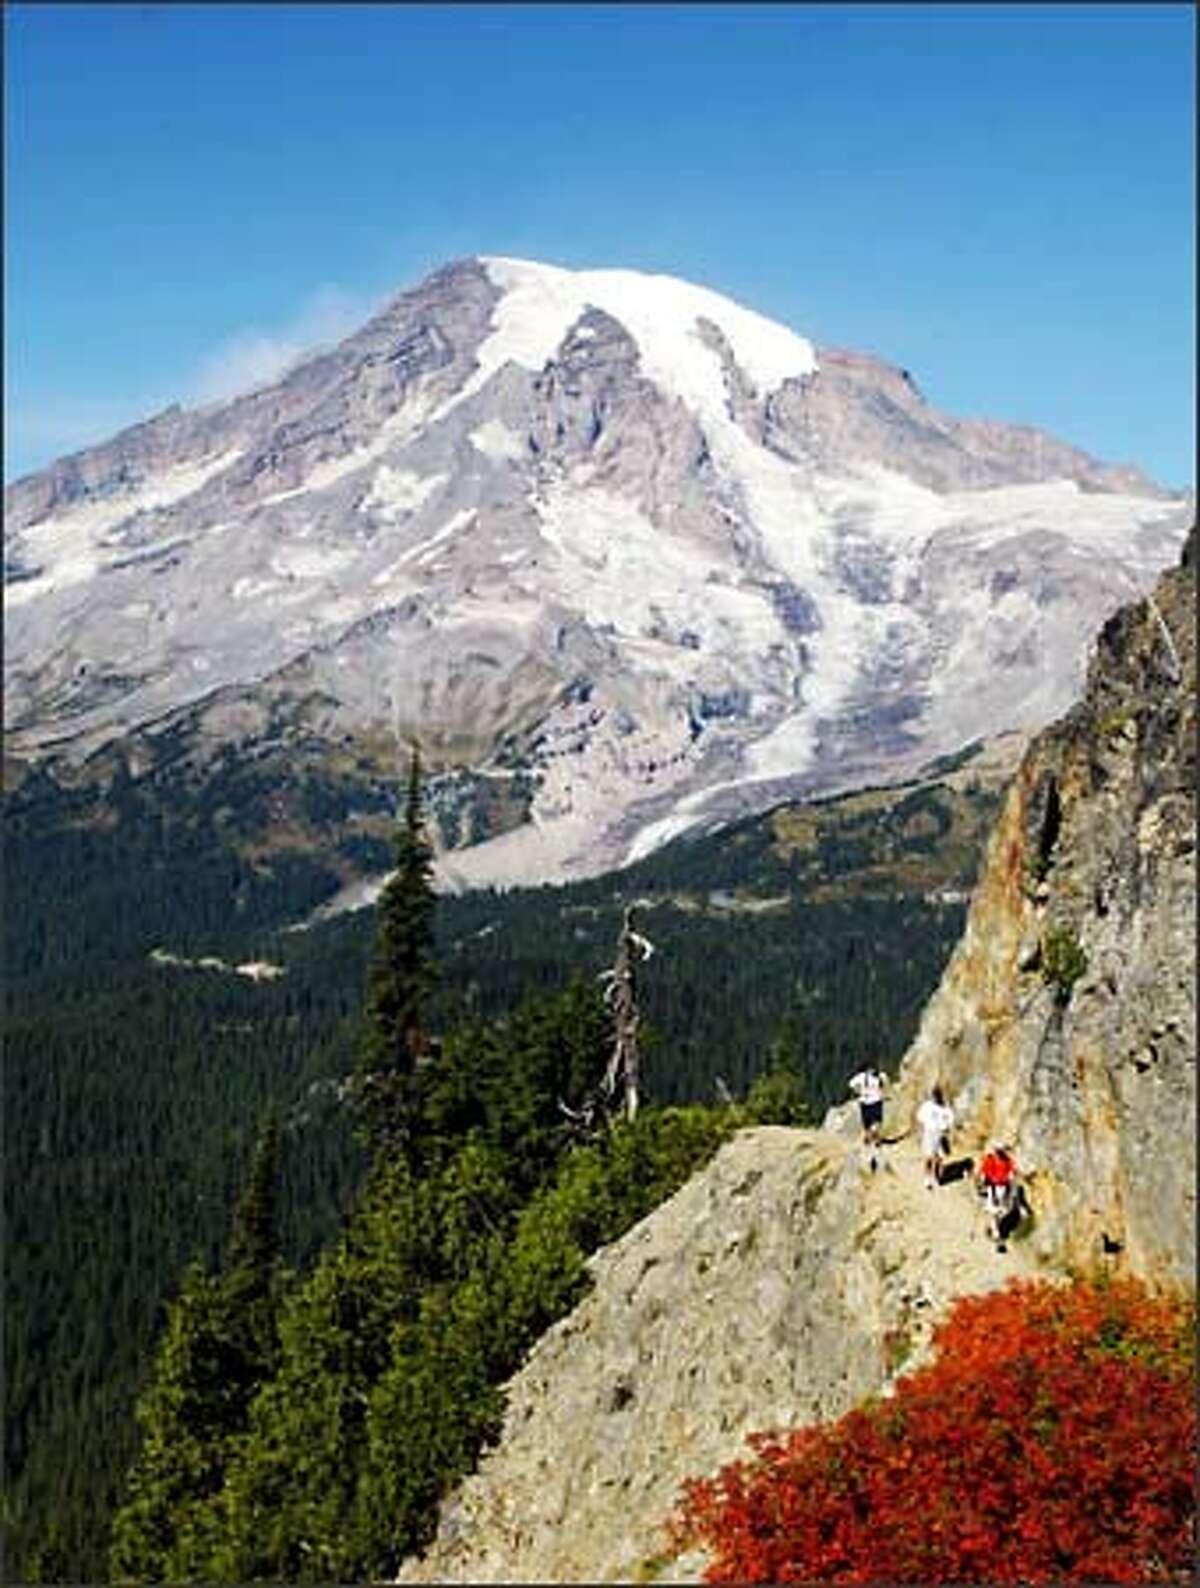 Hikers make their way up the trail to Pinnacle Saddle in Mount Rainier National Park.